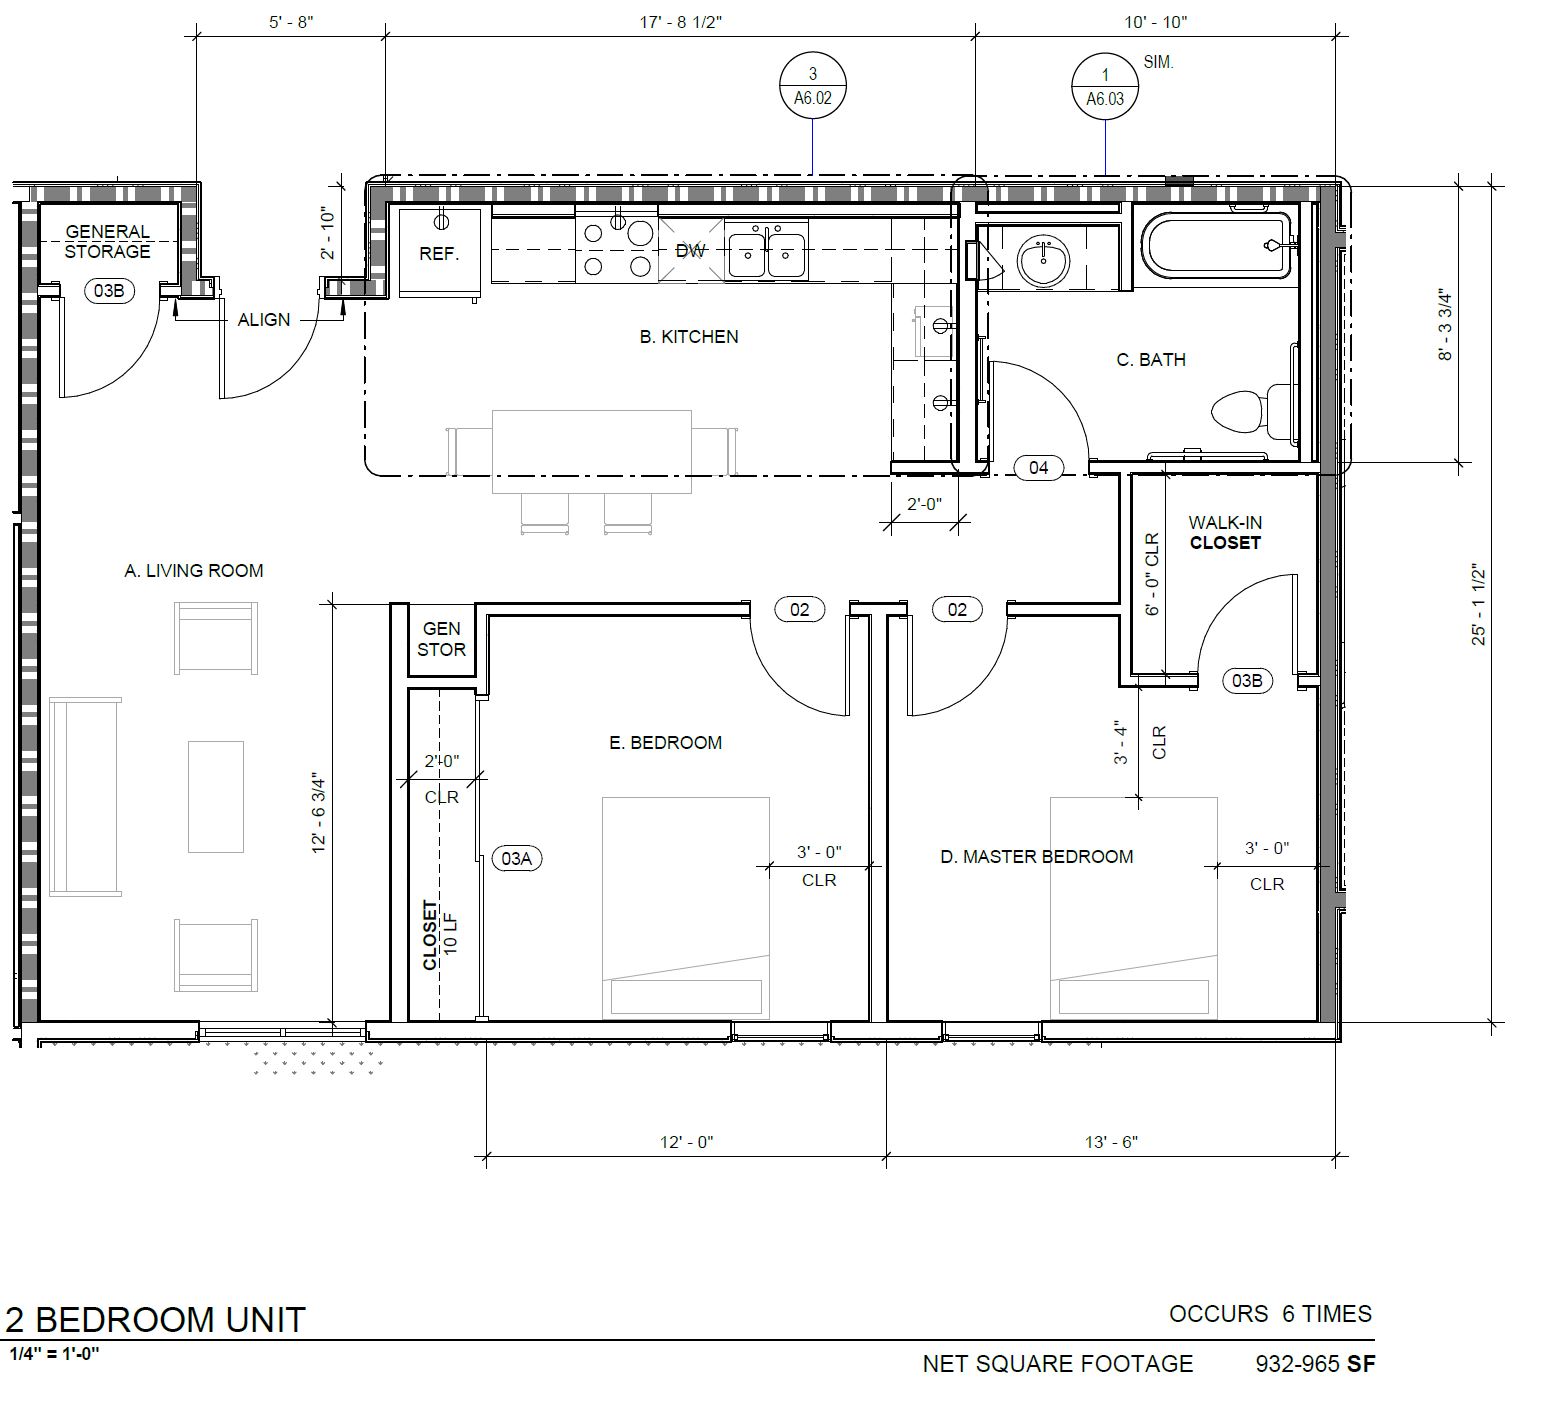 Community Room and Interior 2 Bedroom Units